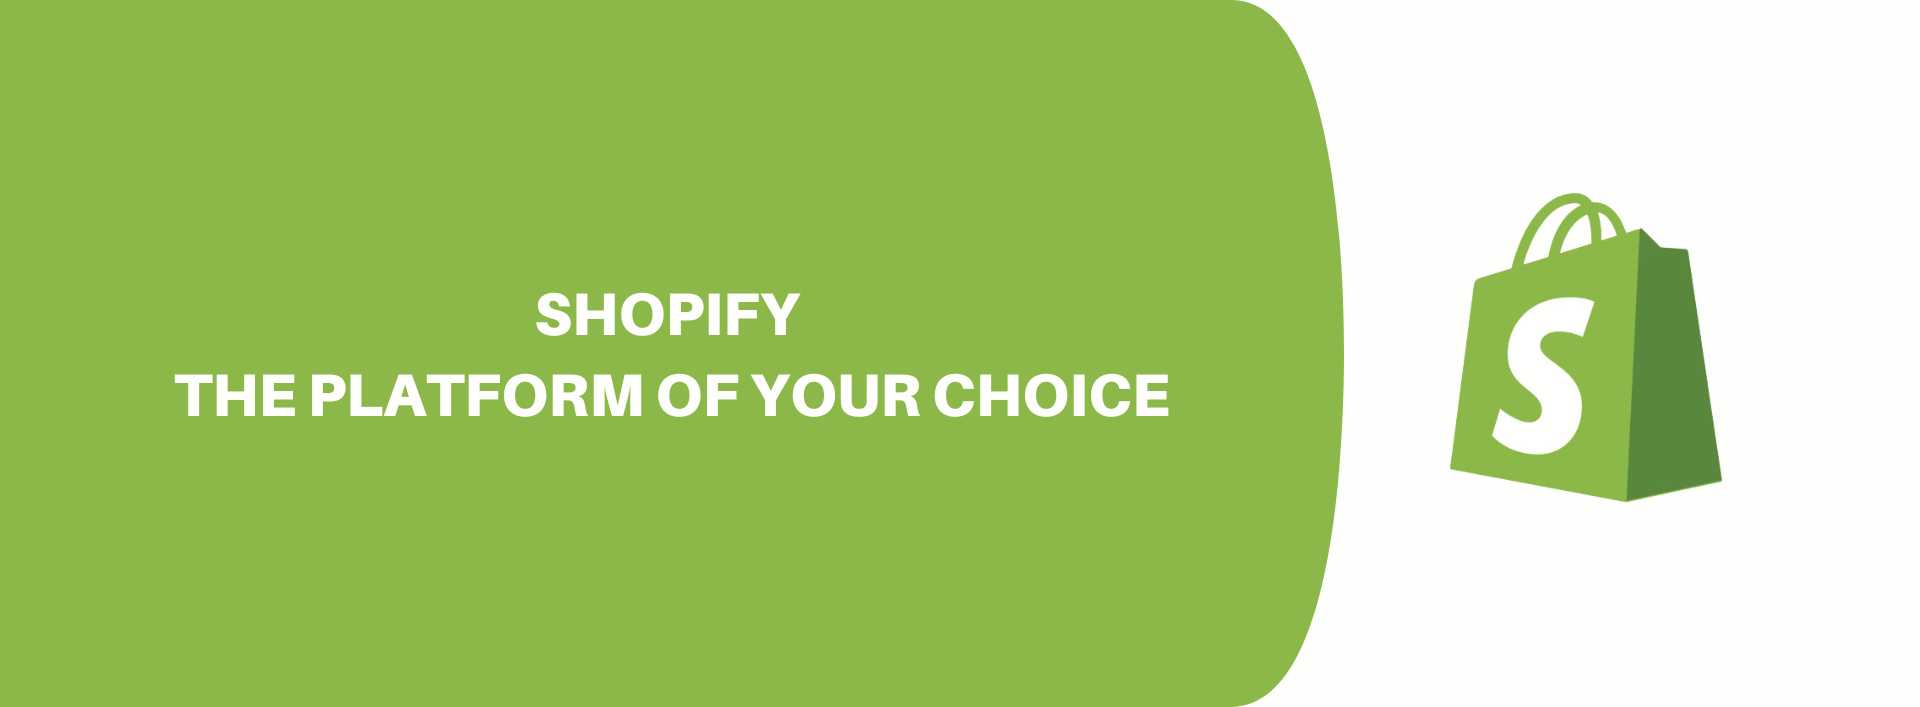 Shopify – The Platform of your choice